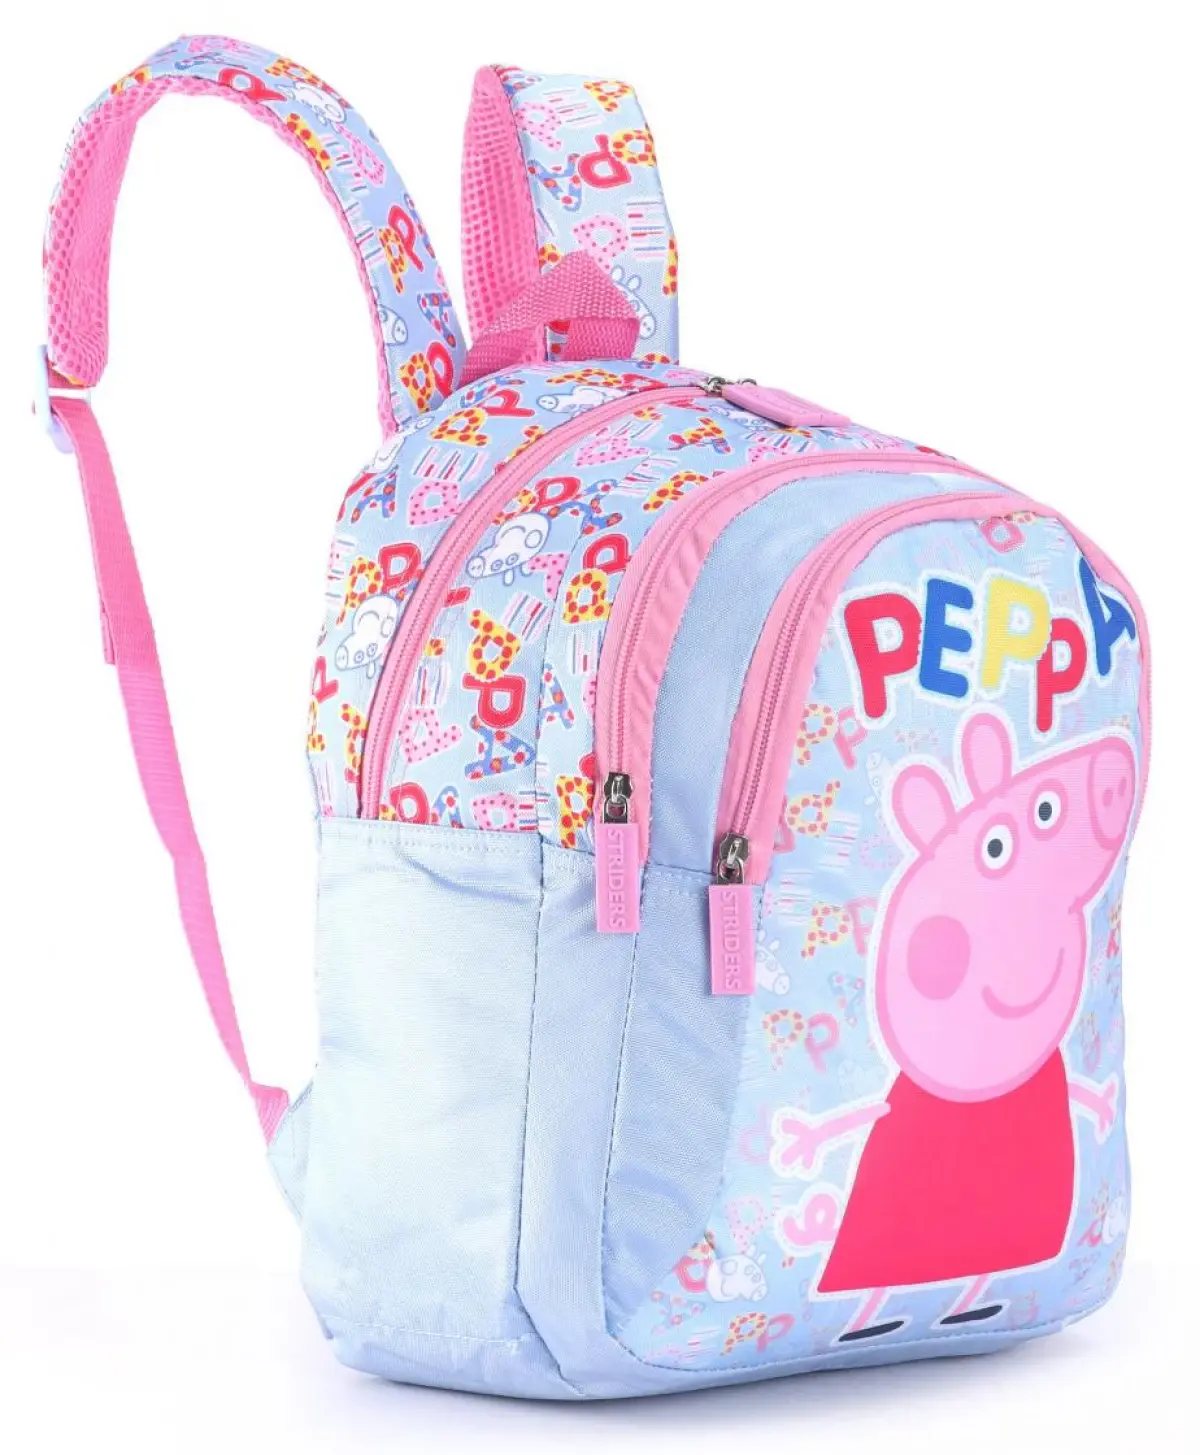 Striders 16 inches Peppa Pig-Inspired School Bag for Little Explorers Multicolour For Kids Ages 6Y+